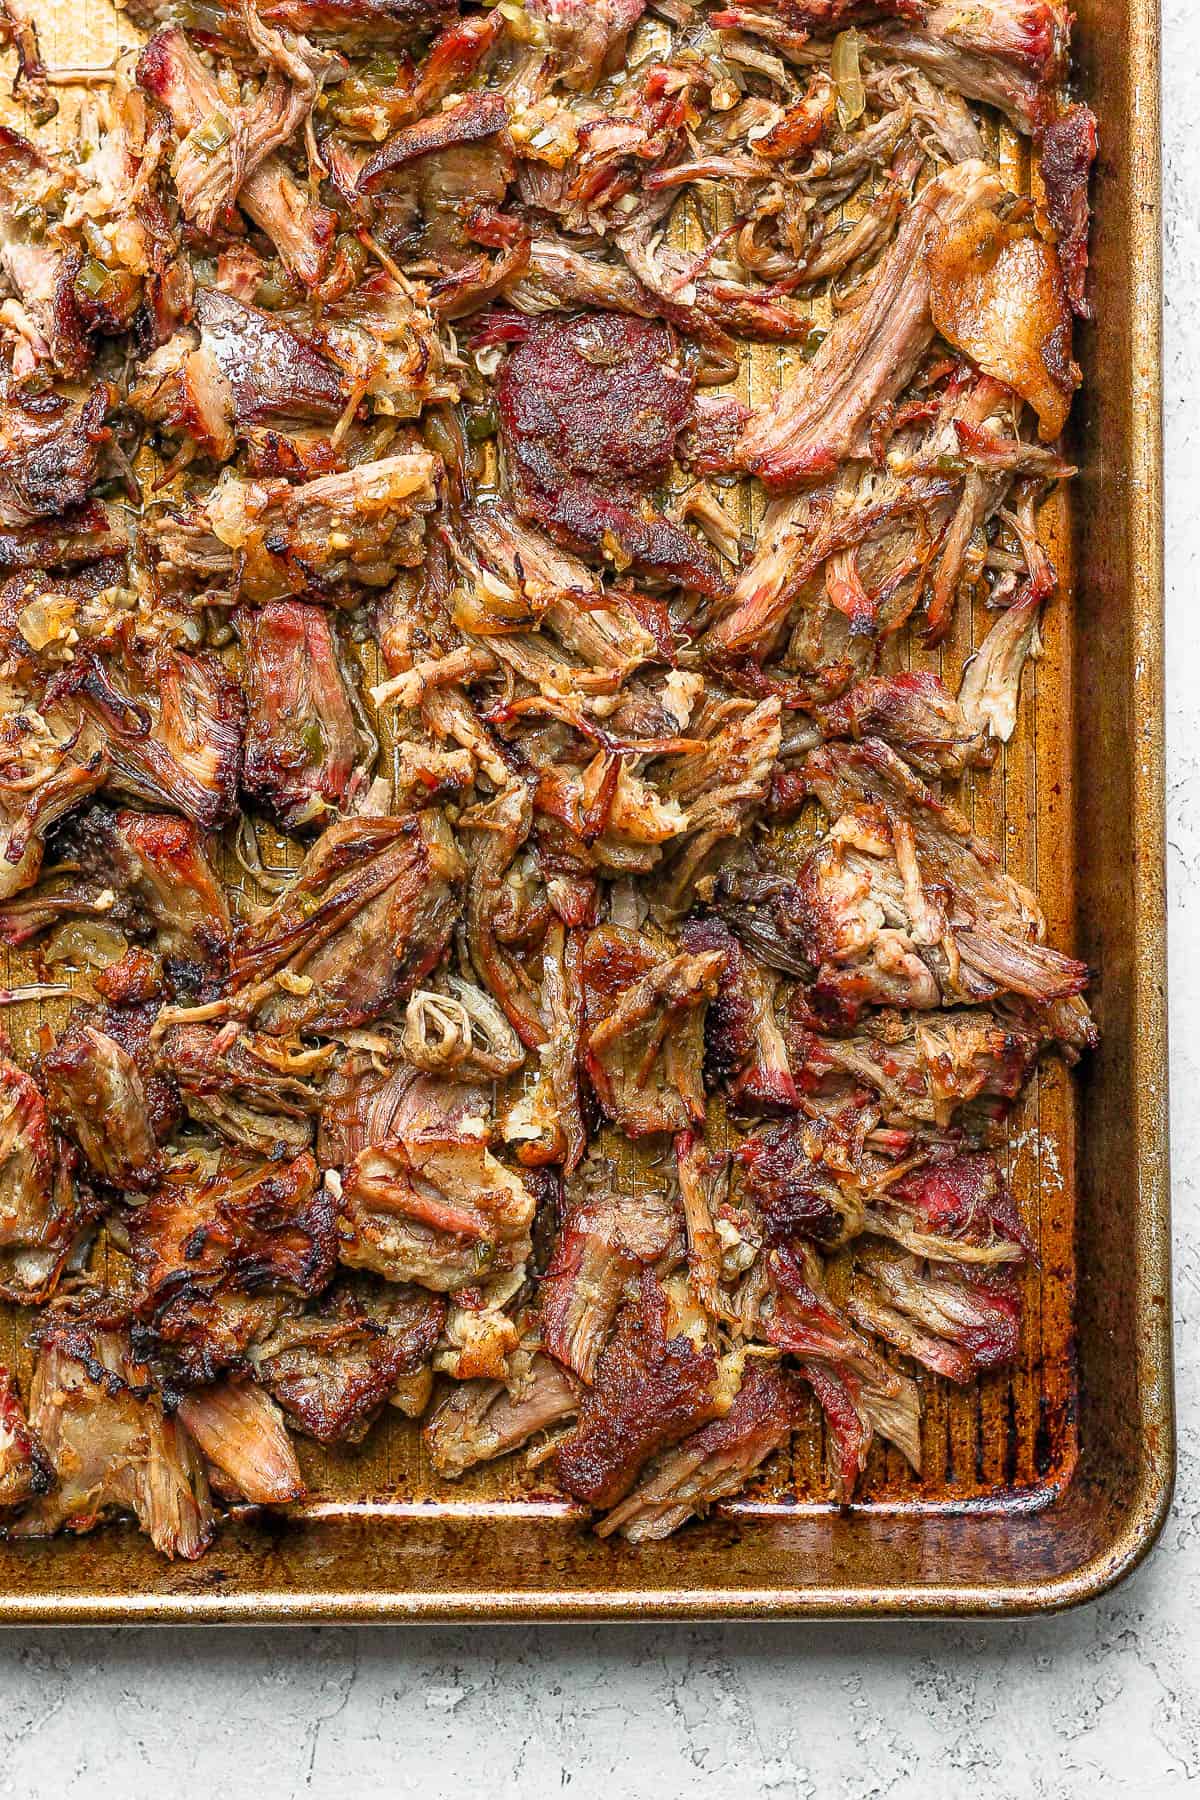 The smoked pork pulled apart and placed on a rimmed baking sheet with some braising liquid poured over the top.